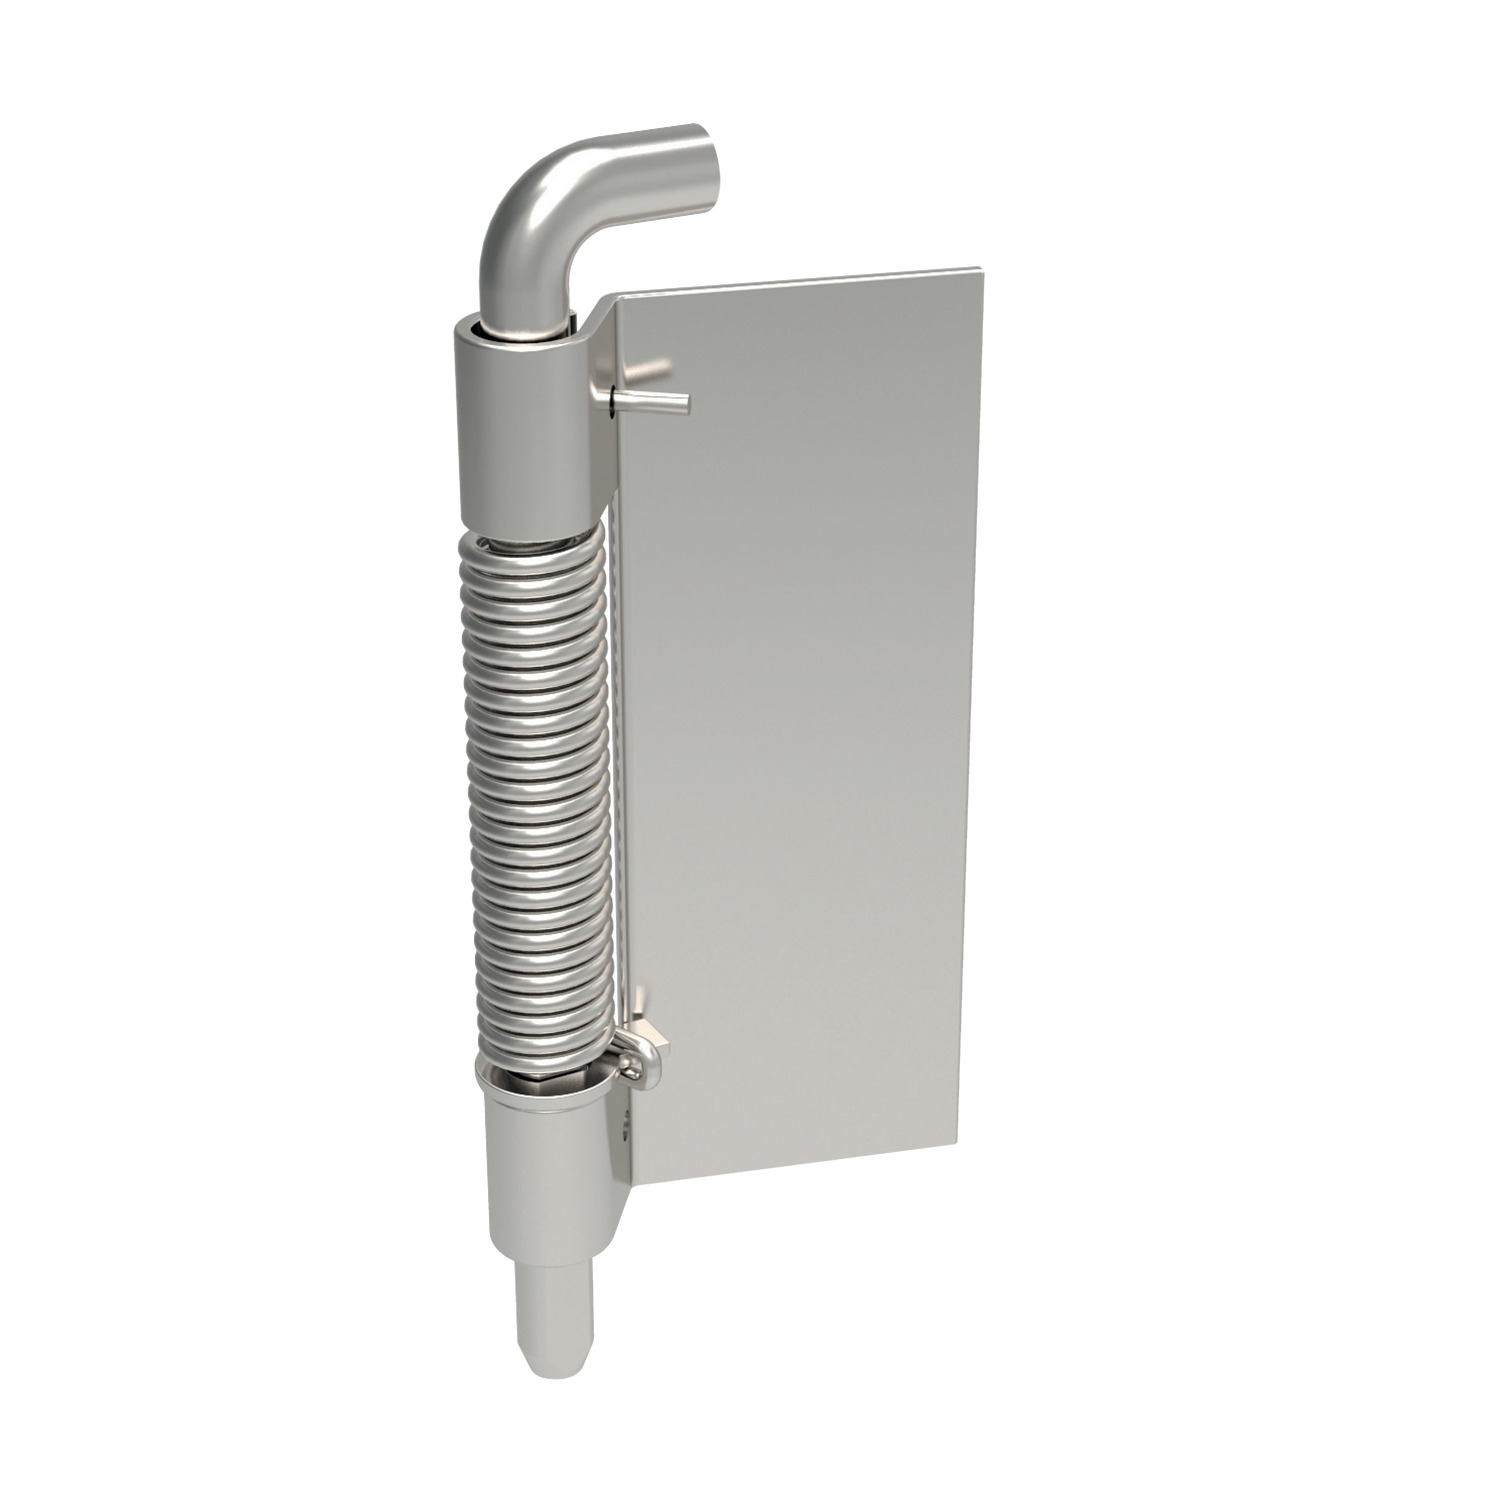 End Mount Concealed Pivot Hinge End mounted concealed pivot hinges - Weld-on. Made from stainless steel.